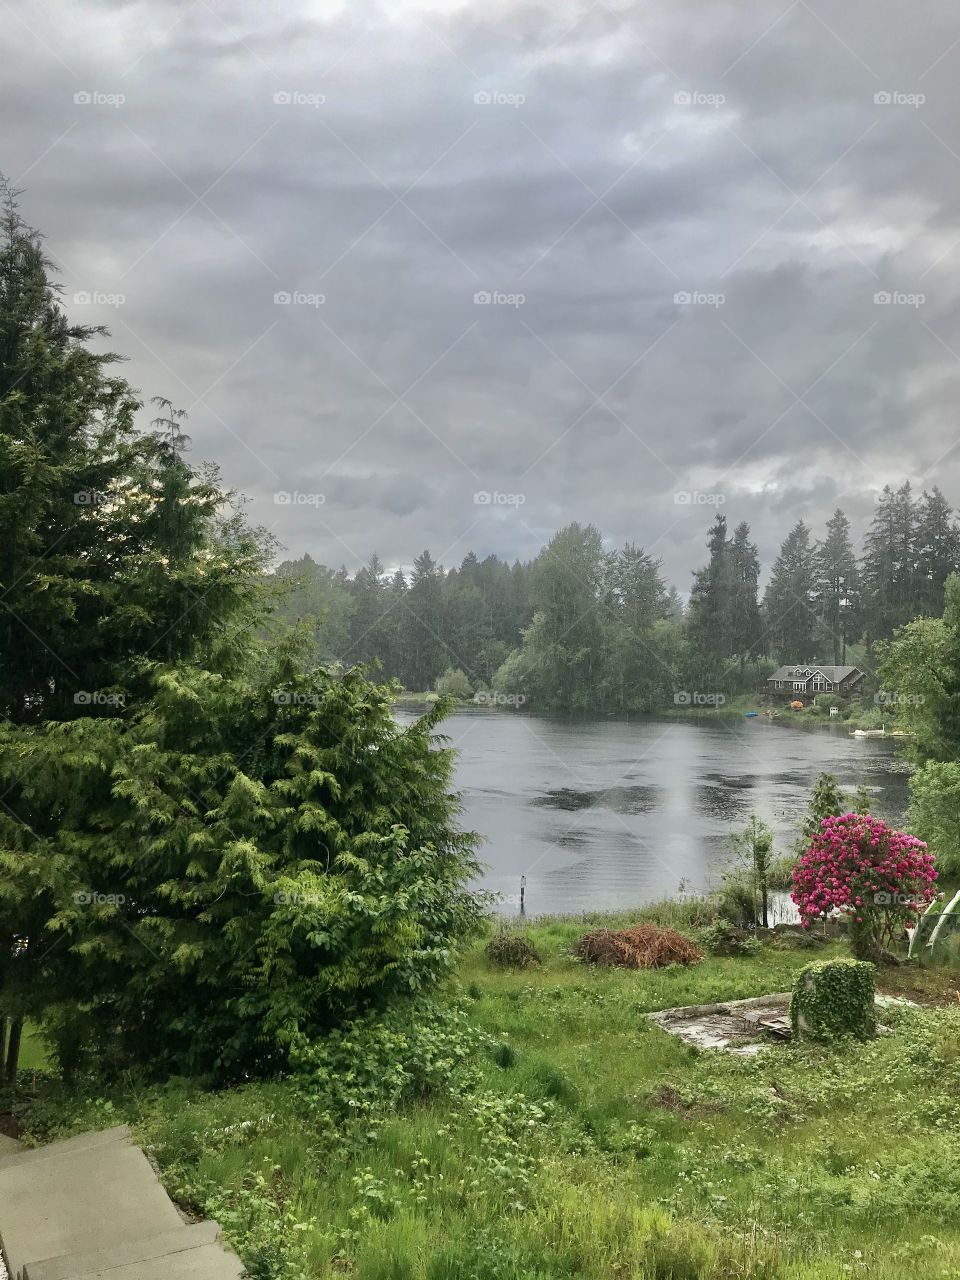 Beautiful view of a peaceful lake on a cloudy day surrounded by trees and forest in a lake house neighborhood 